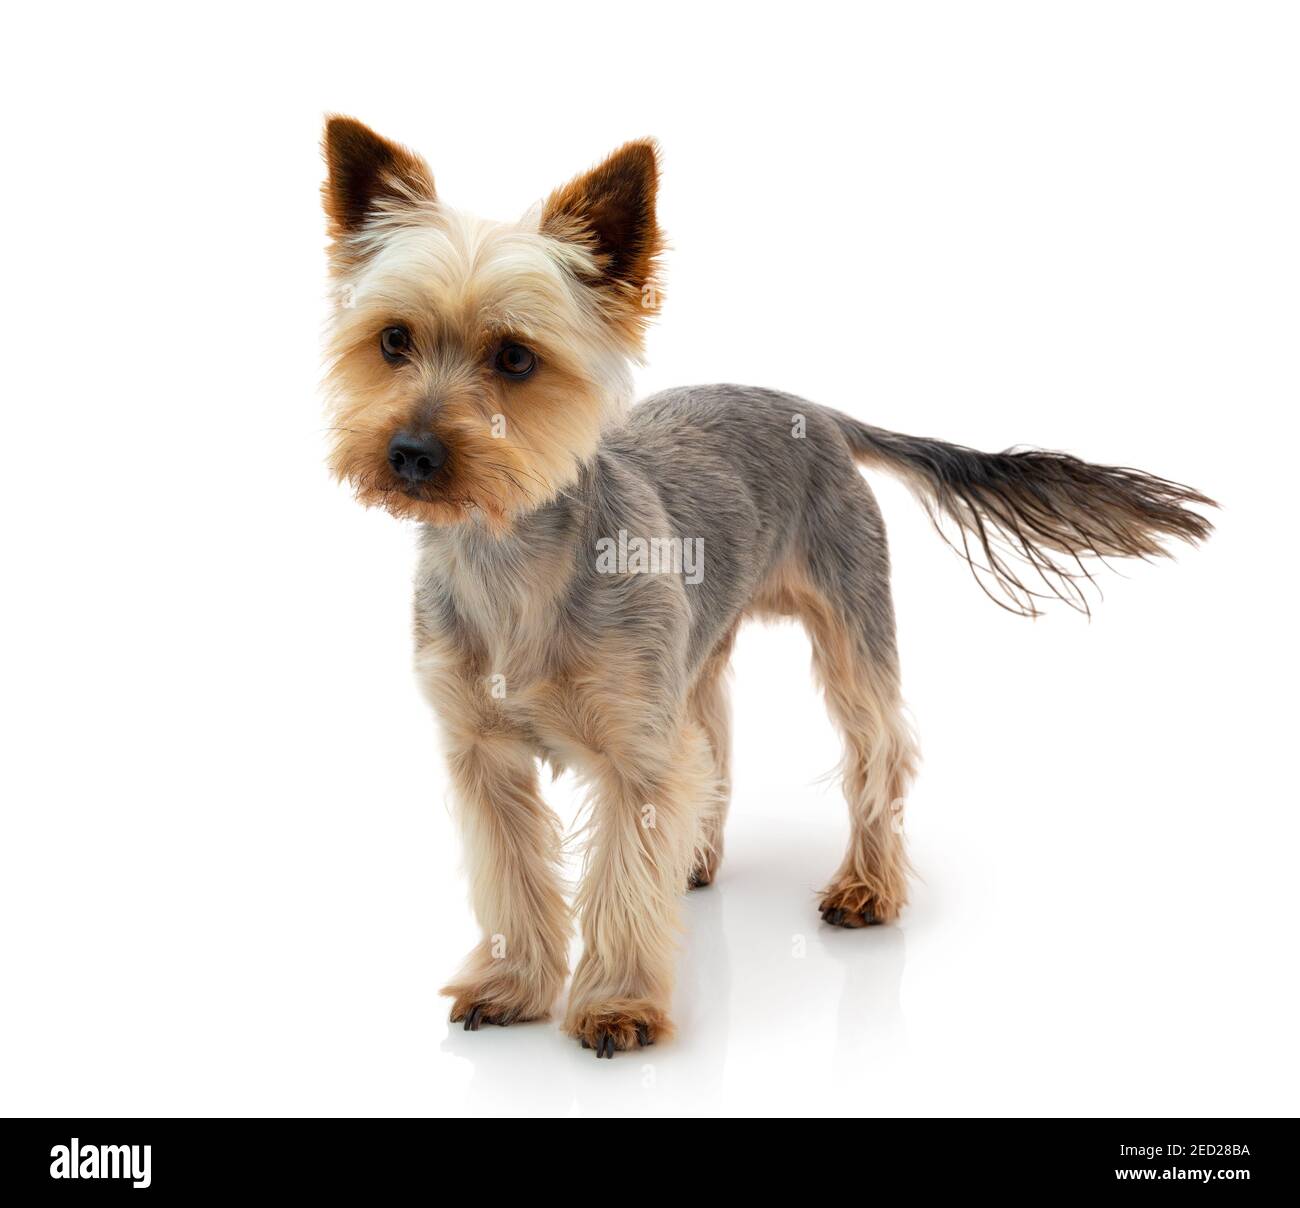 Adorable Australian Silky Terrier staring and waiting for the command isolated on white background with shadow reflection. Cute obedient dog. Fluffy s Stock Photo